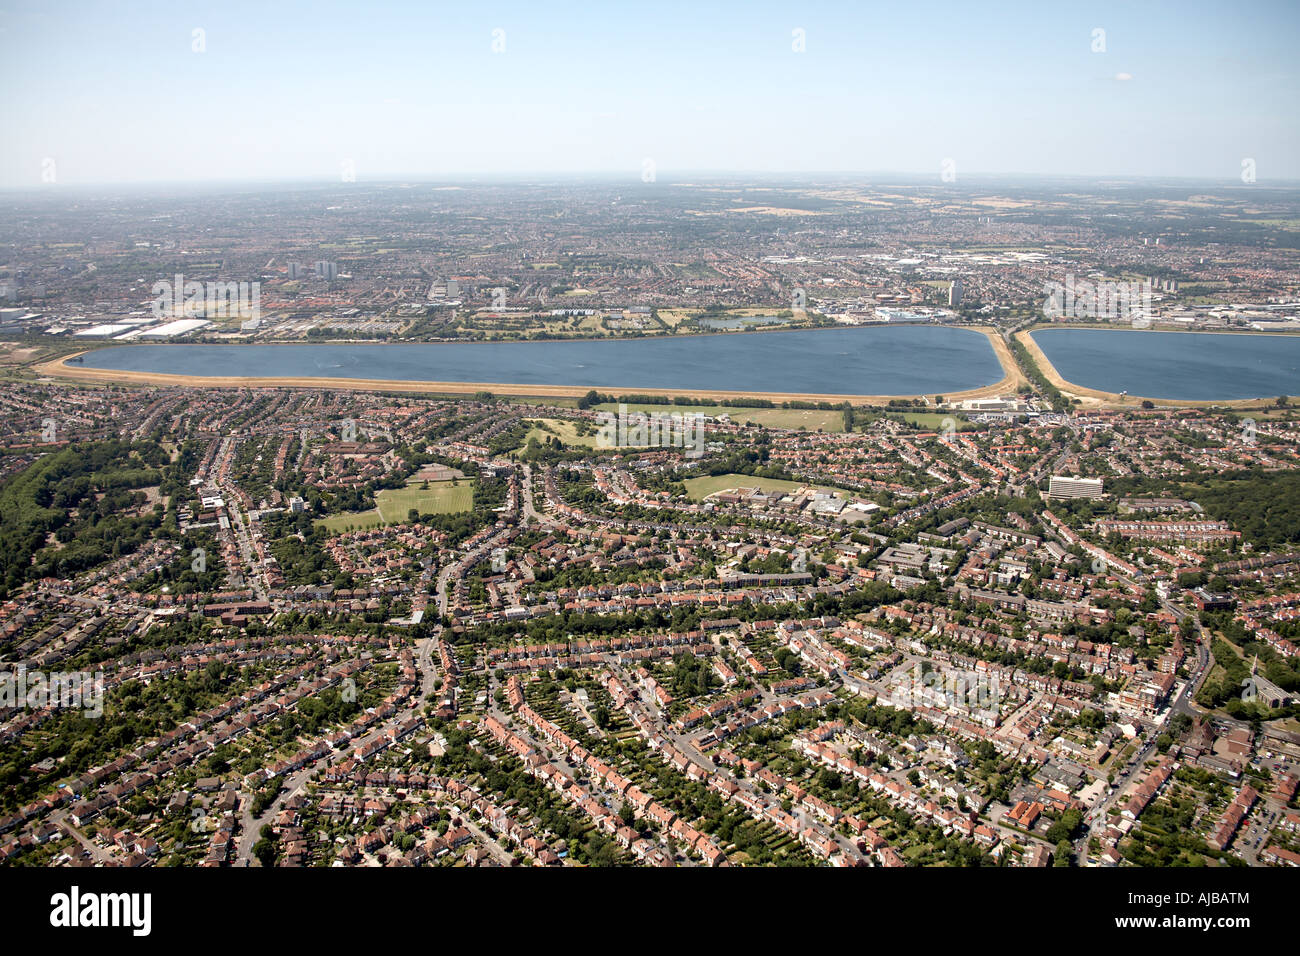 Aerial view north east of Chingford Ponders End William Girling Reservoir Waltham Forest London E4 N9 EN3 England UK High level Stock Photo